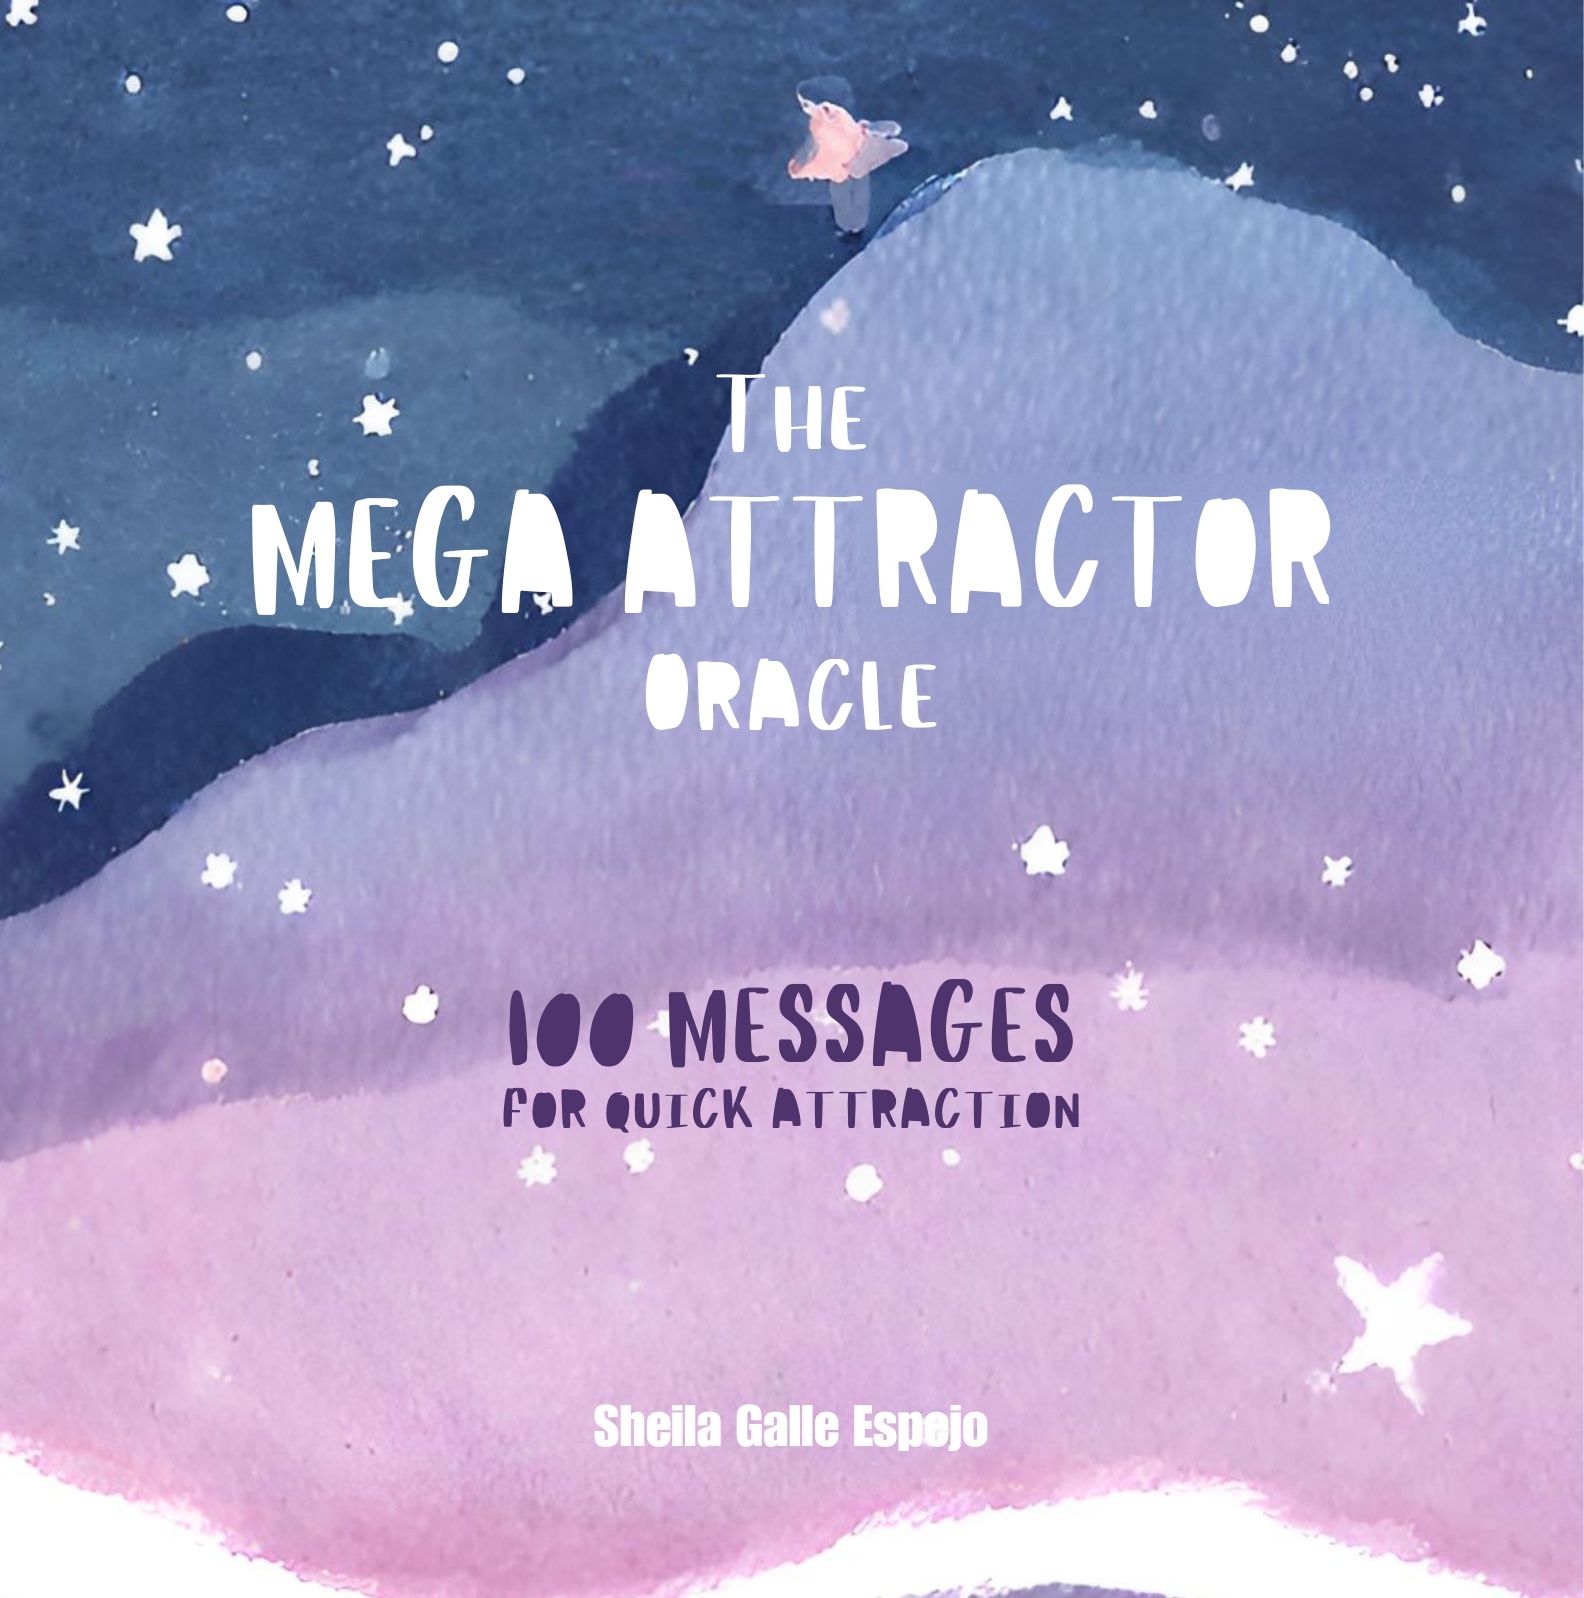 The Mega Attractor Oracle